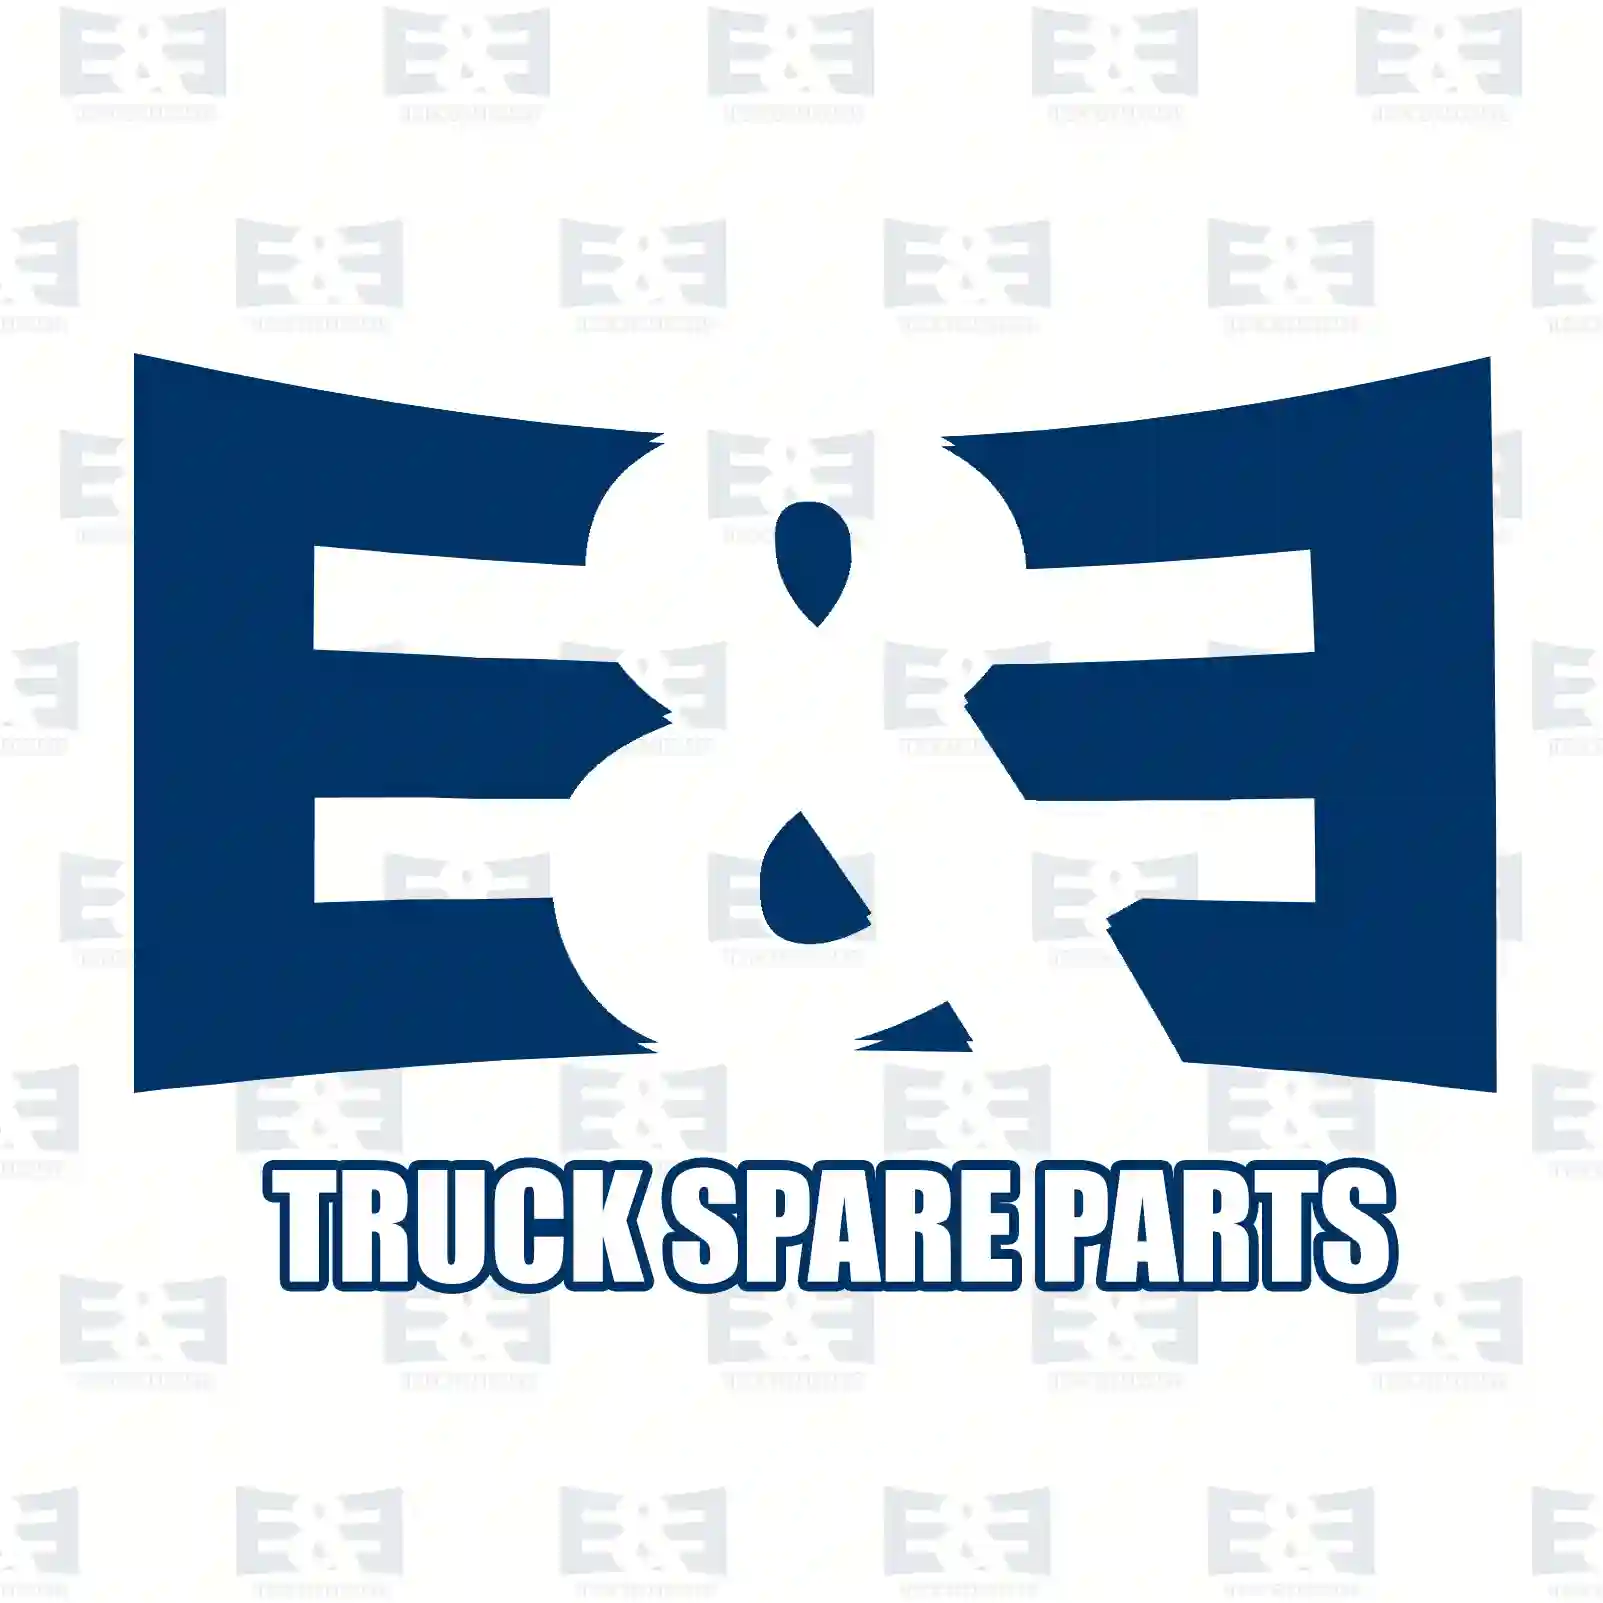 Repair kit, gearbox switching, 2E2279199, 1897110, 81326906049, 0002642015 ||  2E2279199 E&E Truck Spare Parts | Truck Spare Parts, Auotomotive Spare Parts Repair kit, gearbox switching, 2E2279199, 1897110, 81326906049, 0002642015 ||  2E2279199 E&E Truck Spare Parts | Truck Spare Parts, Auotomotive Spare Parts